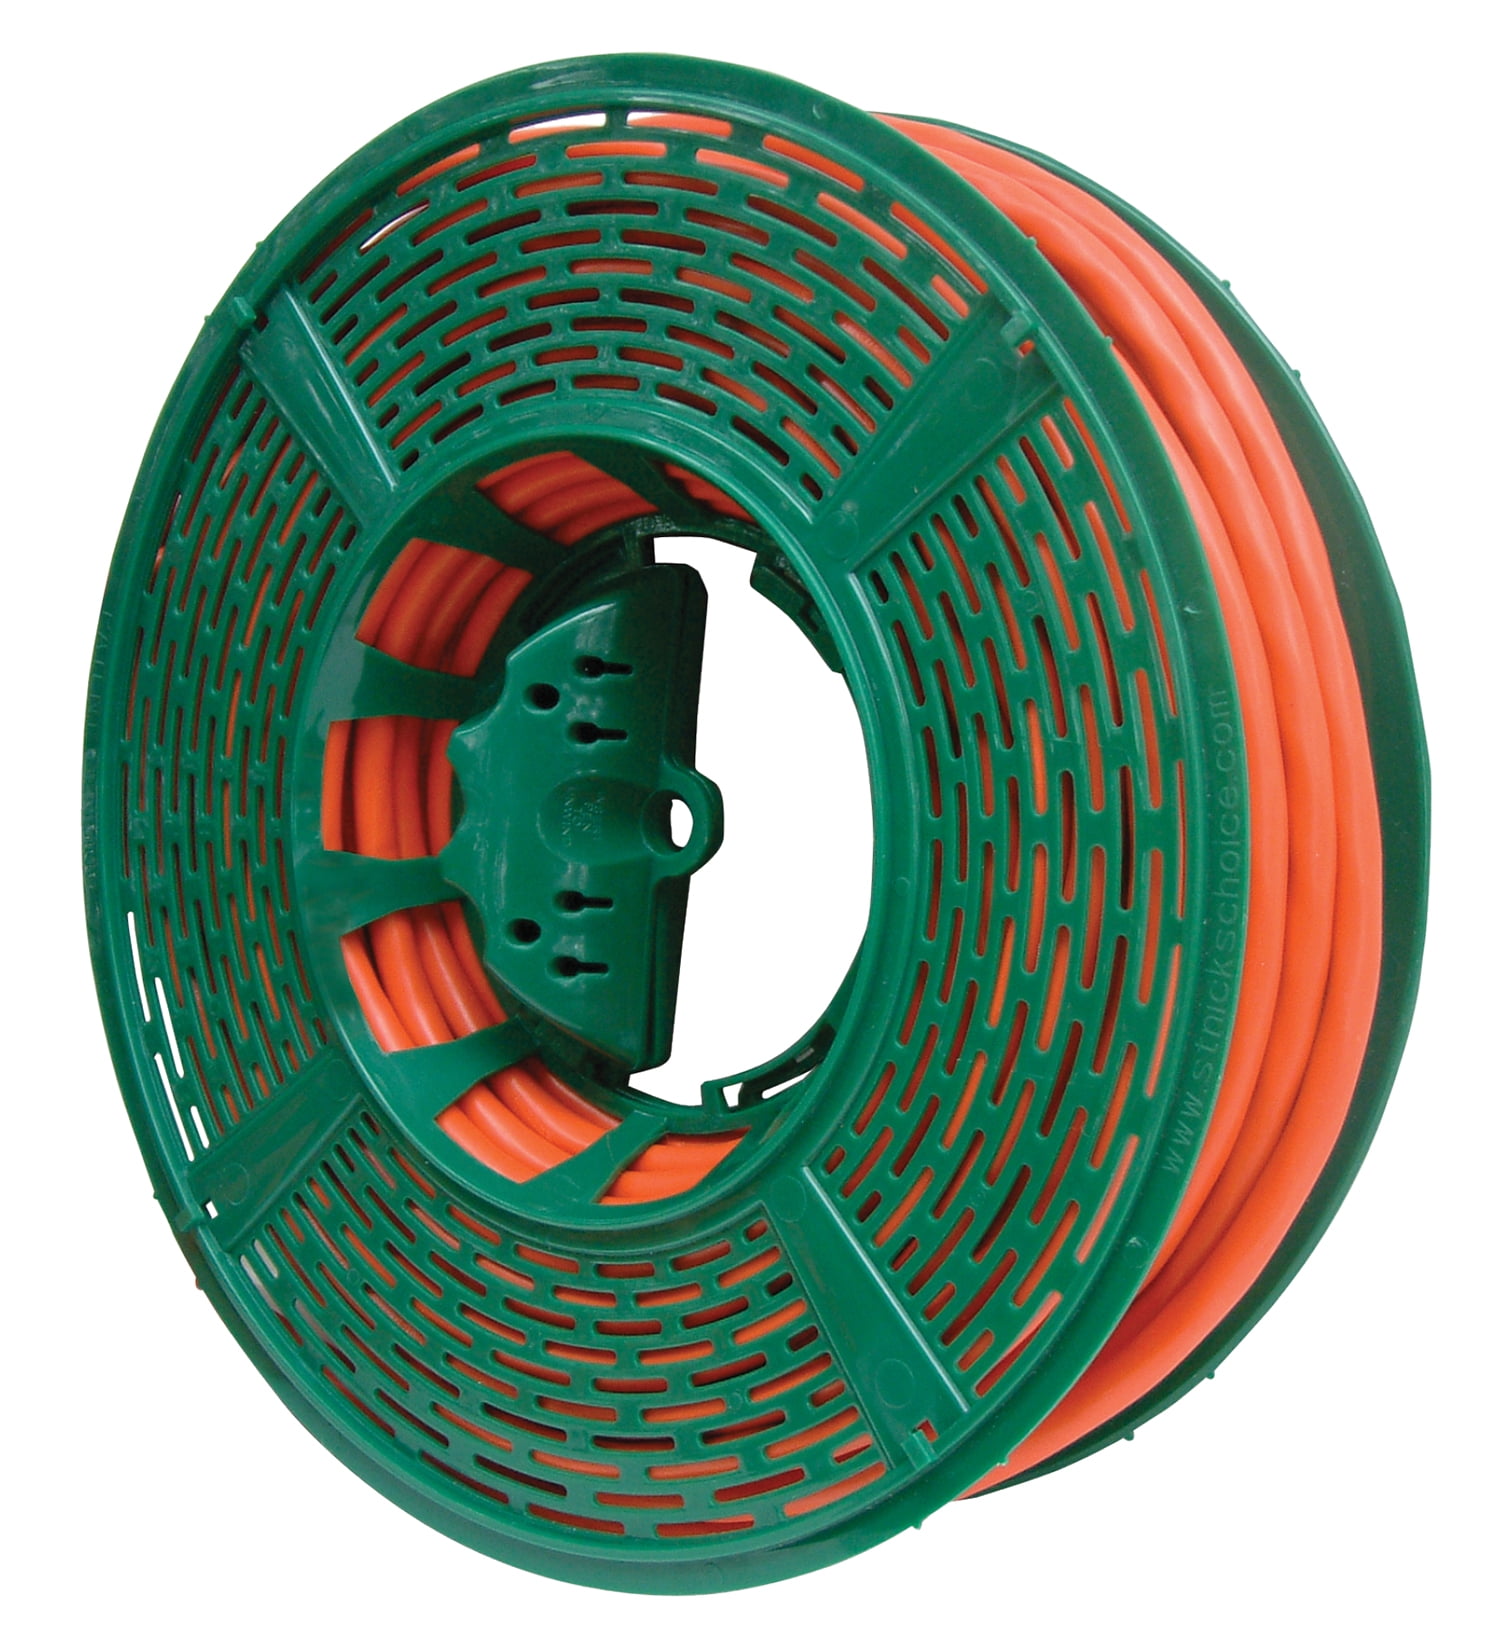 Green Plastic Christmas Light Reels with Red Storage Bag - 3 Count